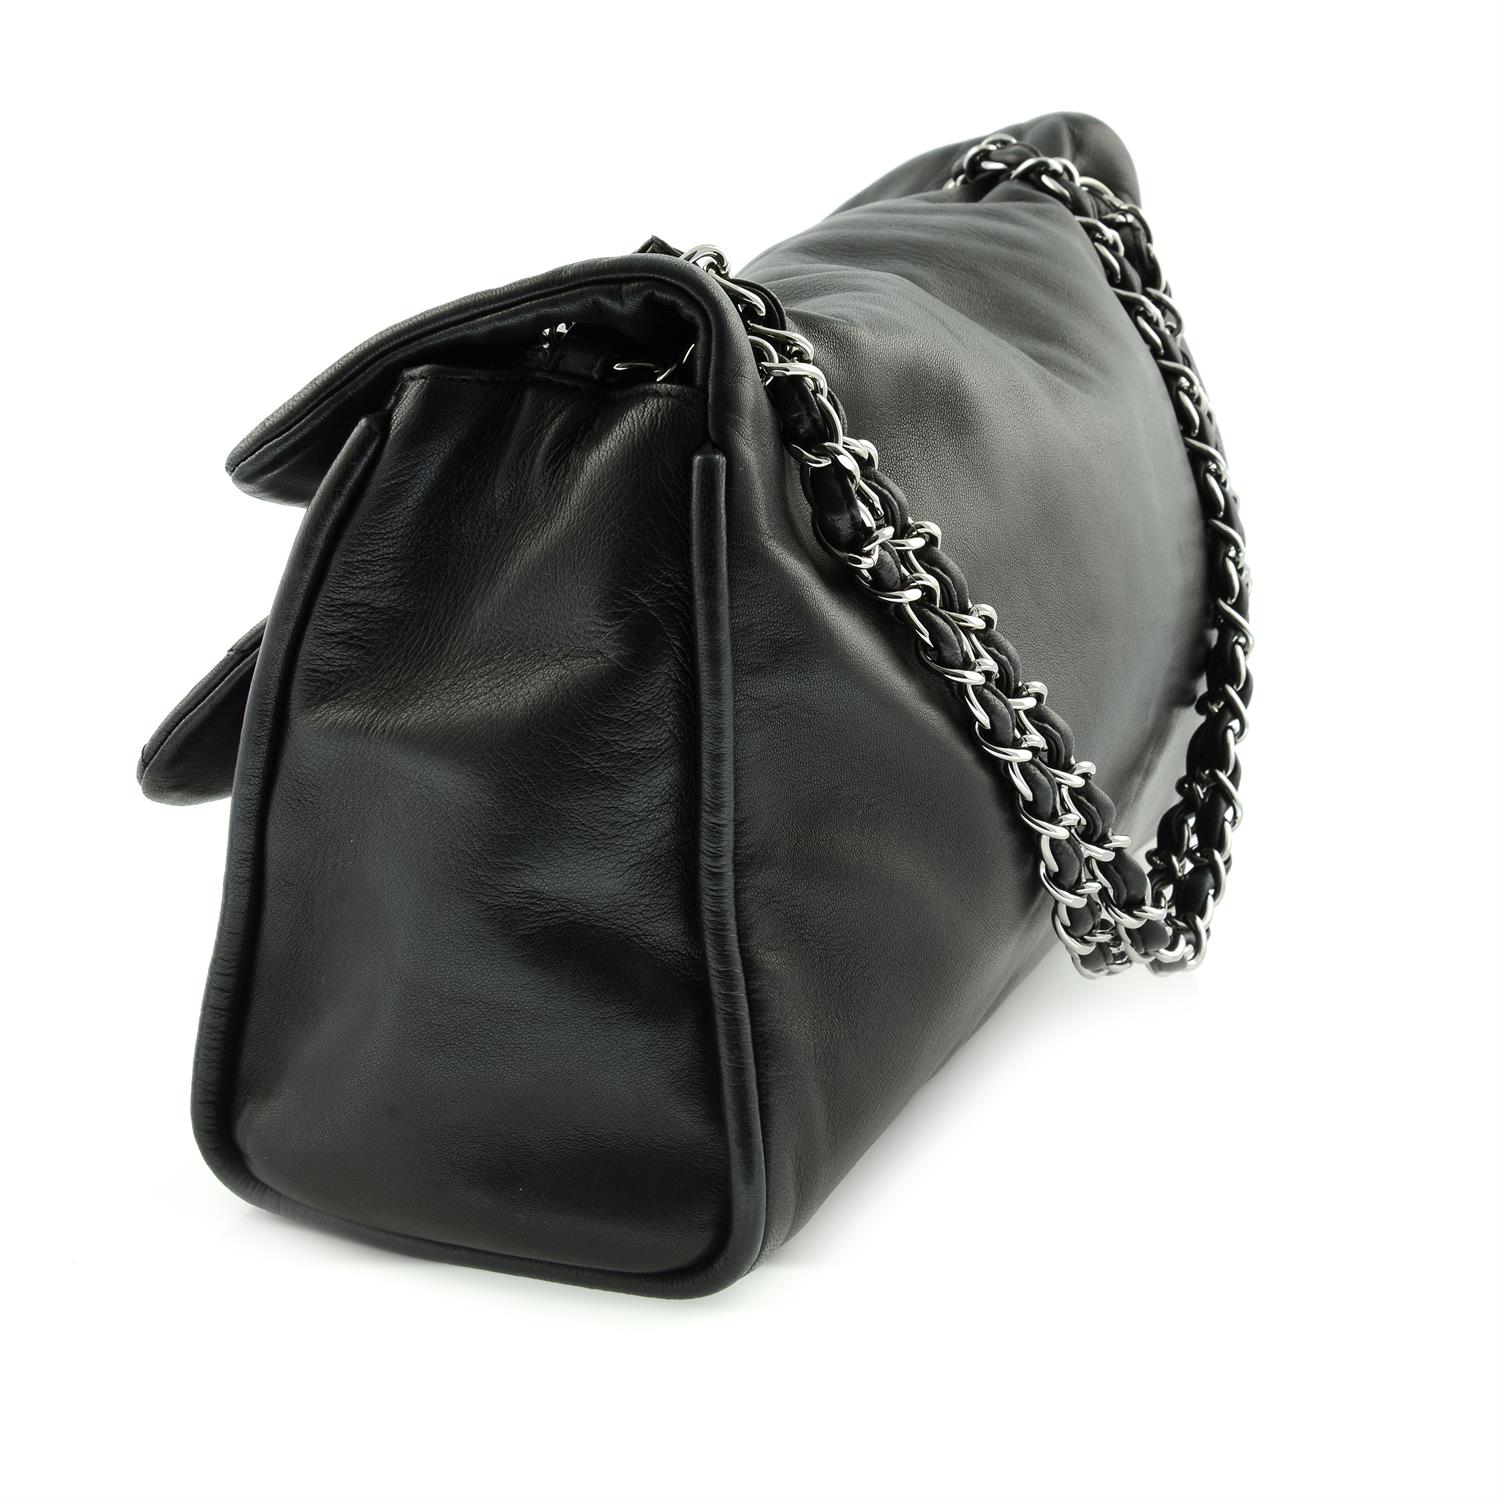 CHANEL - a black lambskin 2.55 Reissue large double flap tote bag. - Image 3 of 4